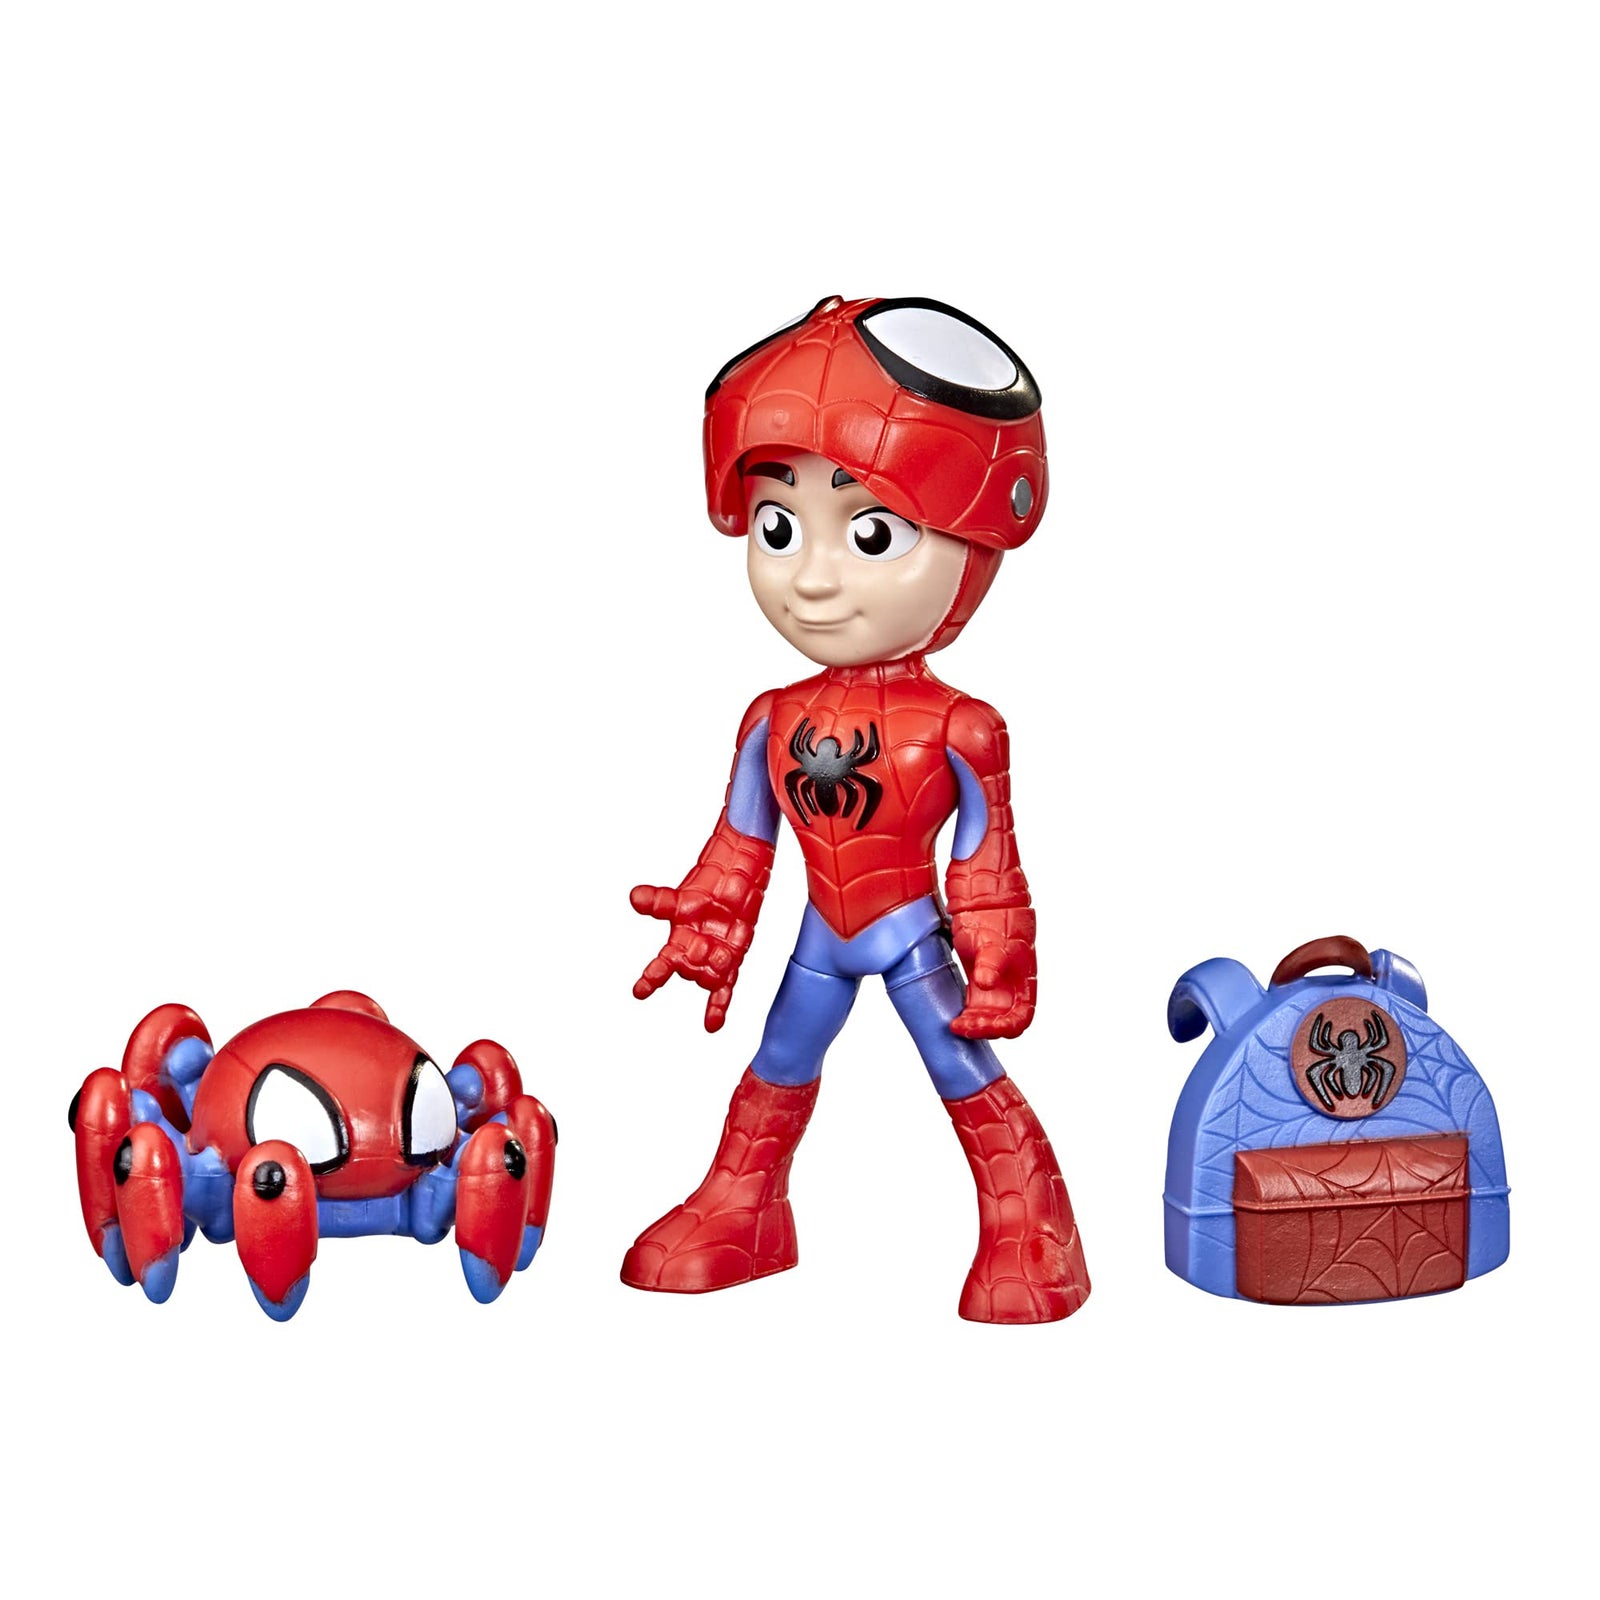 Marvel Spidey and His Amazing Friends Hero Reveal 2-Pack, 4-Inch Scale-Action Figures,-Mask Flip Feature, Spidey and Trace-E, 3 and Up